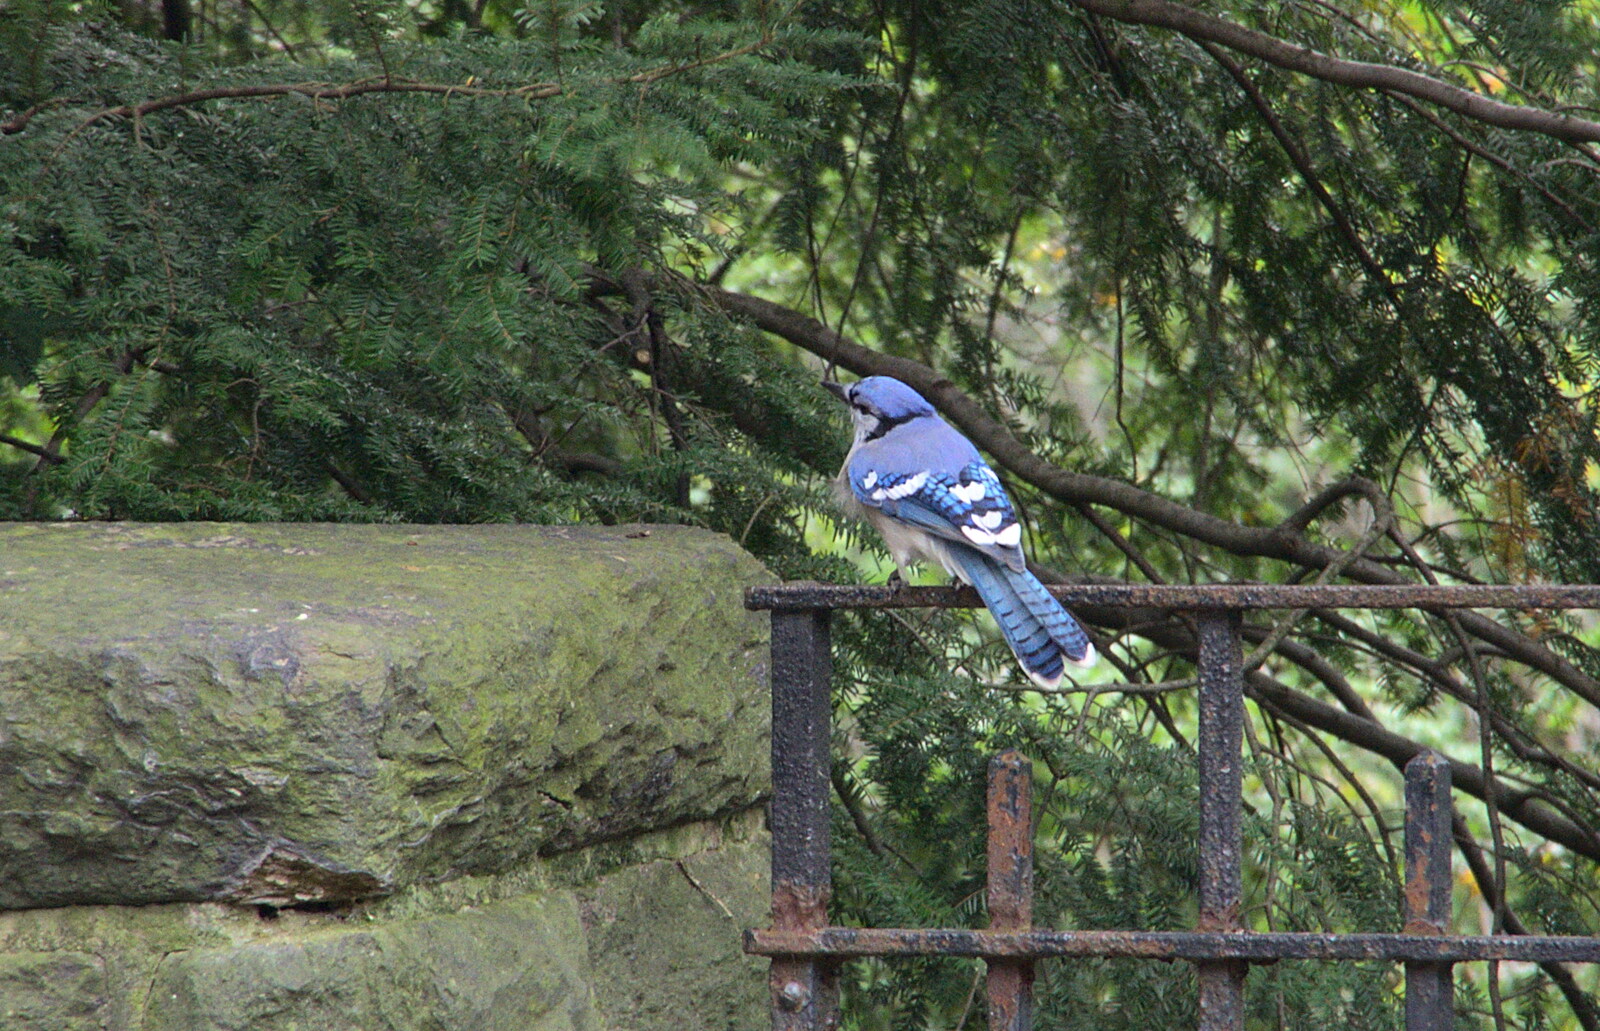 A Blue Jay from Open-top Buses and a Day at the Museum, New York, United States - 22nd October 2018